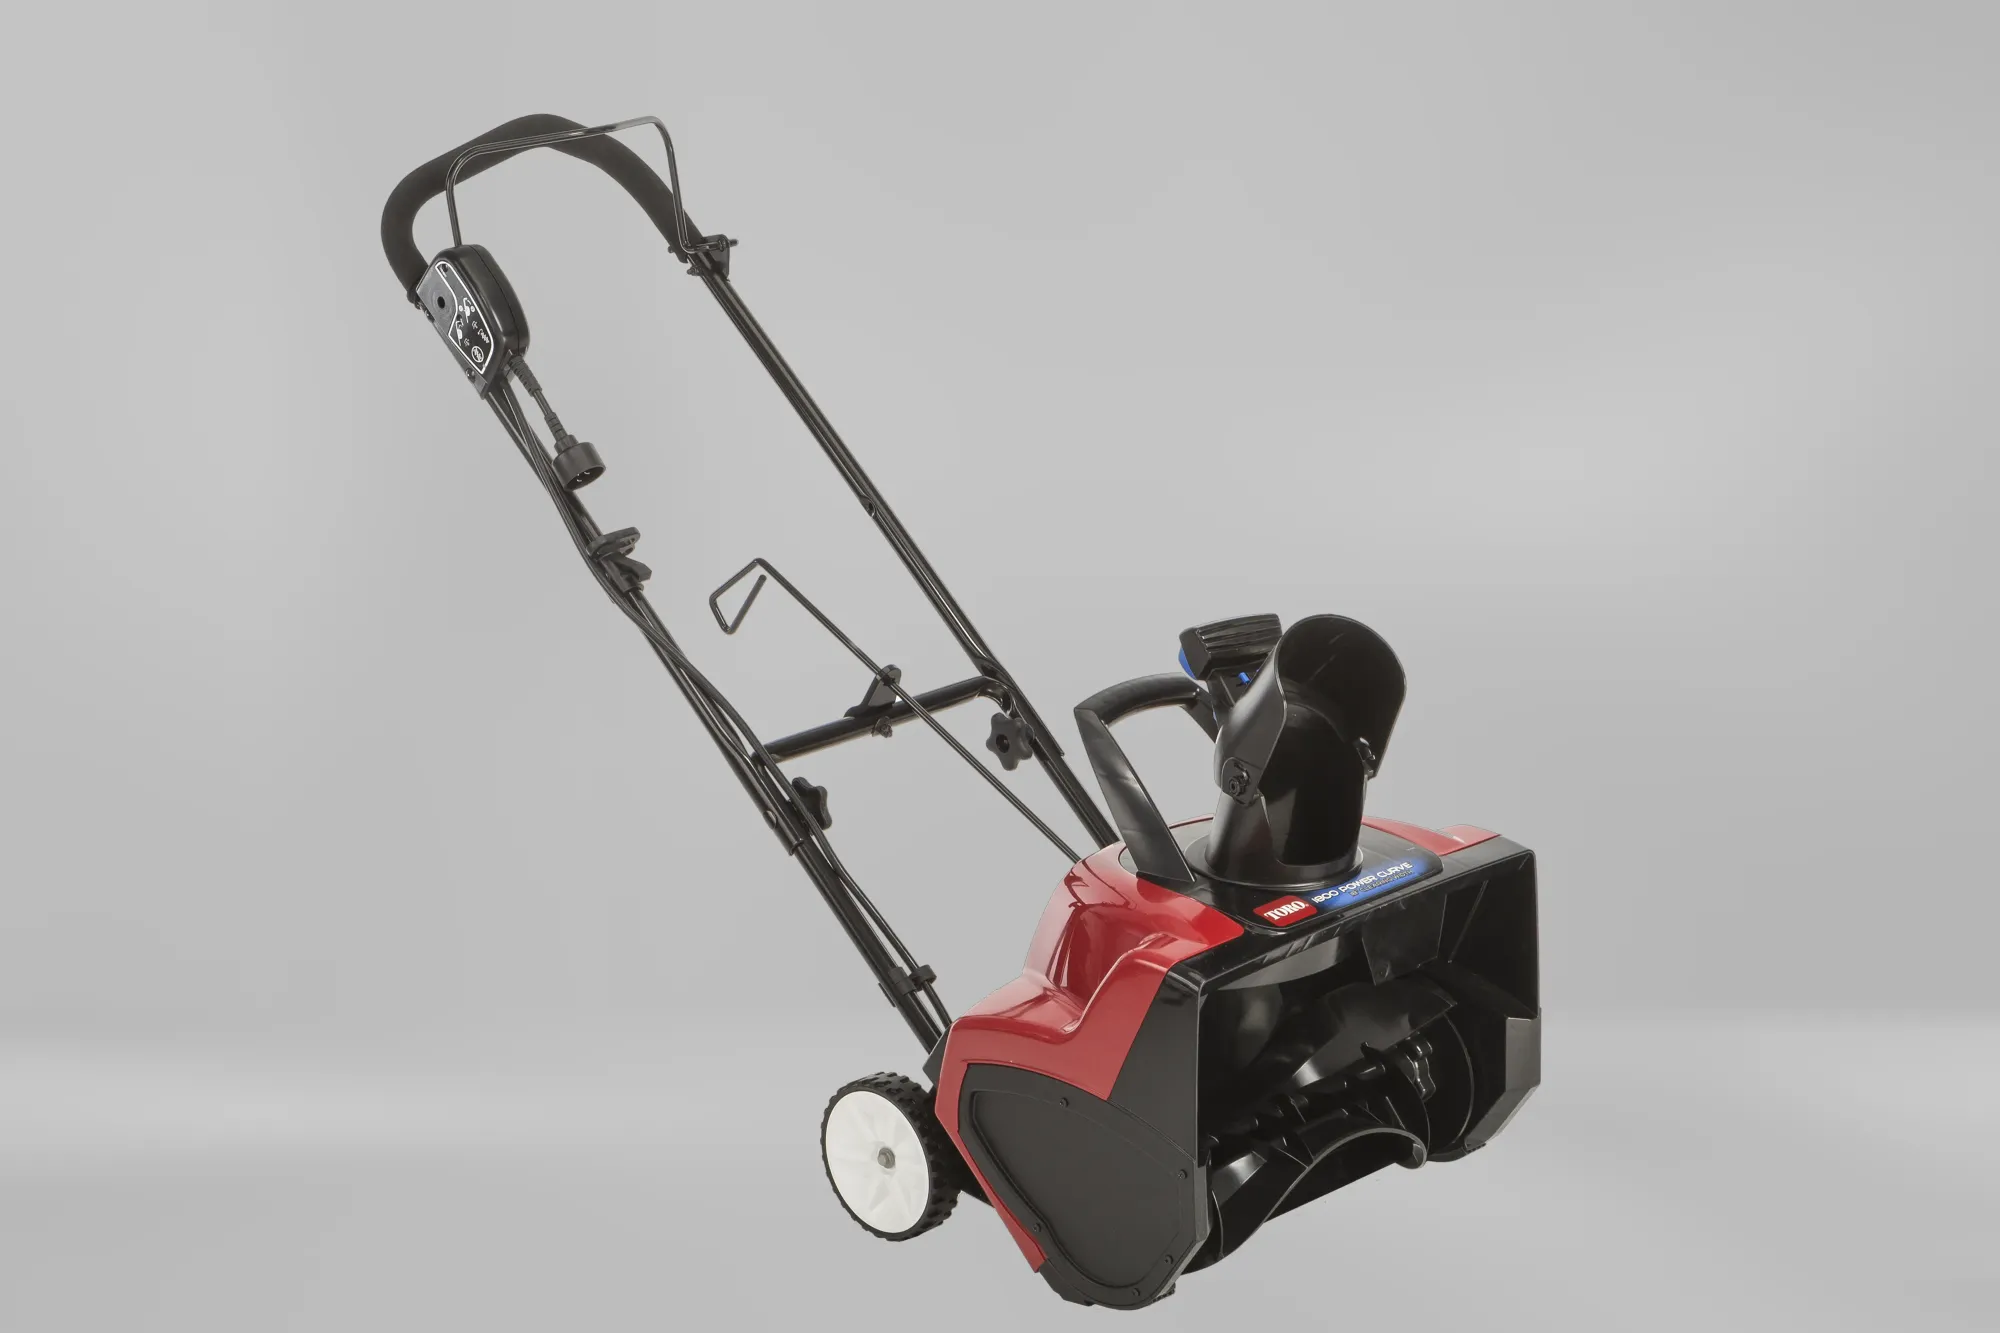 Best Snow Blower Under $500 - Ultimate buying guide